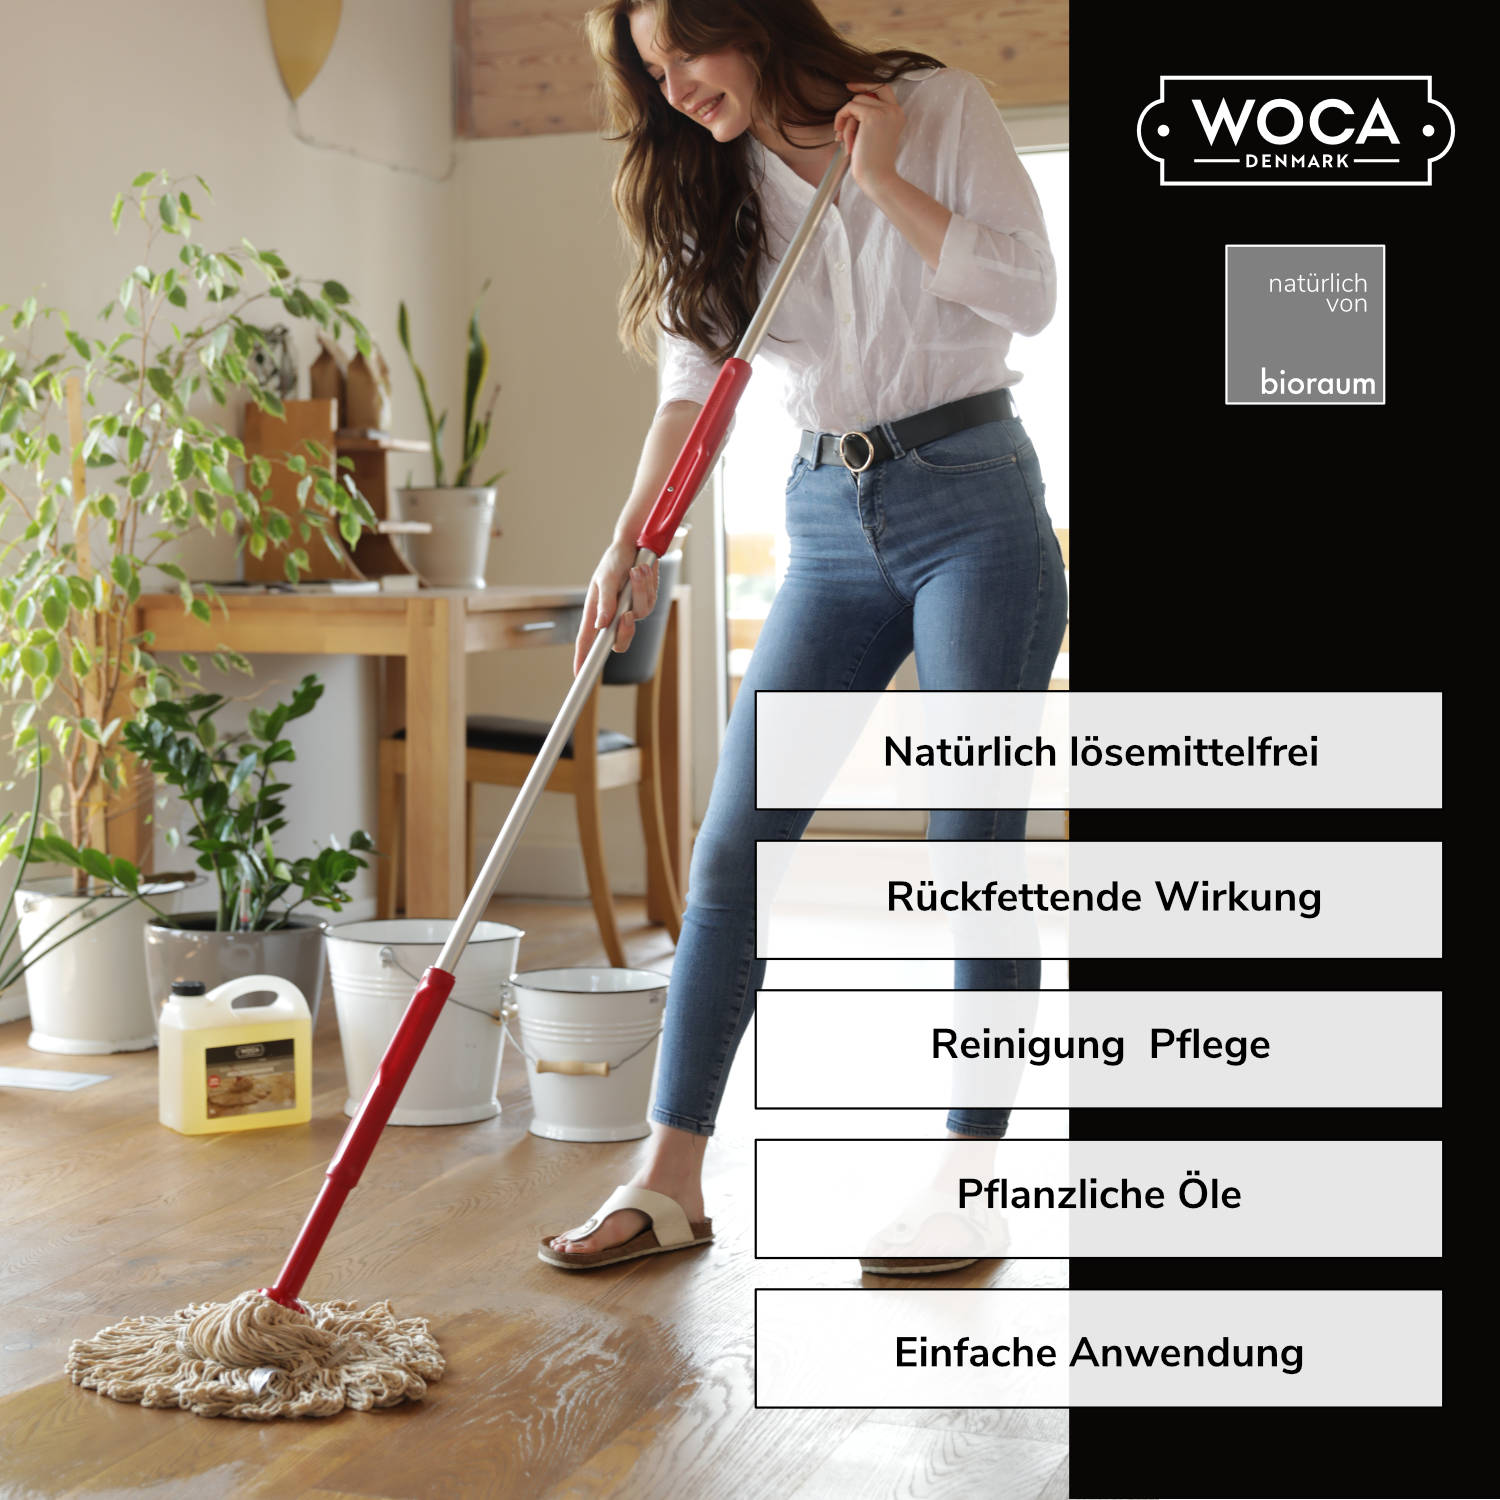 WOCA Holzbodenseife natur 3l - 20% extra